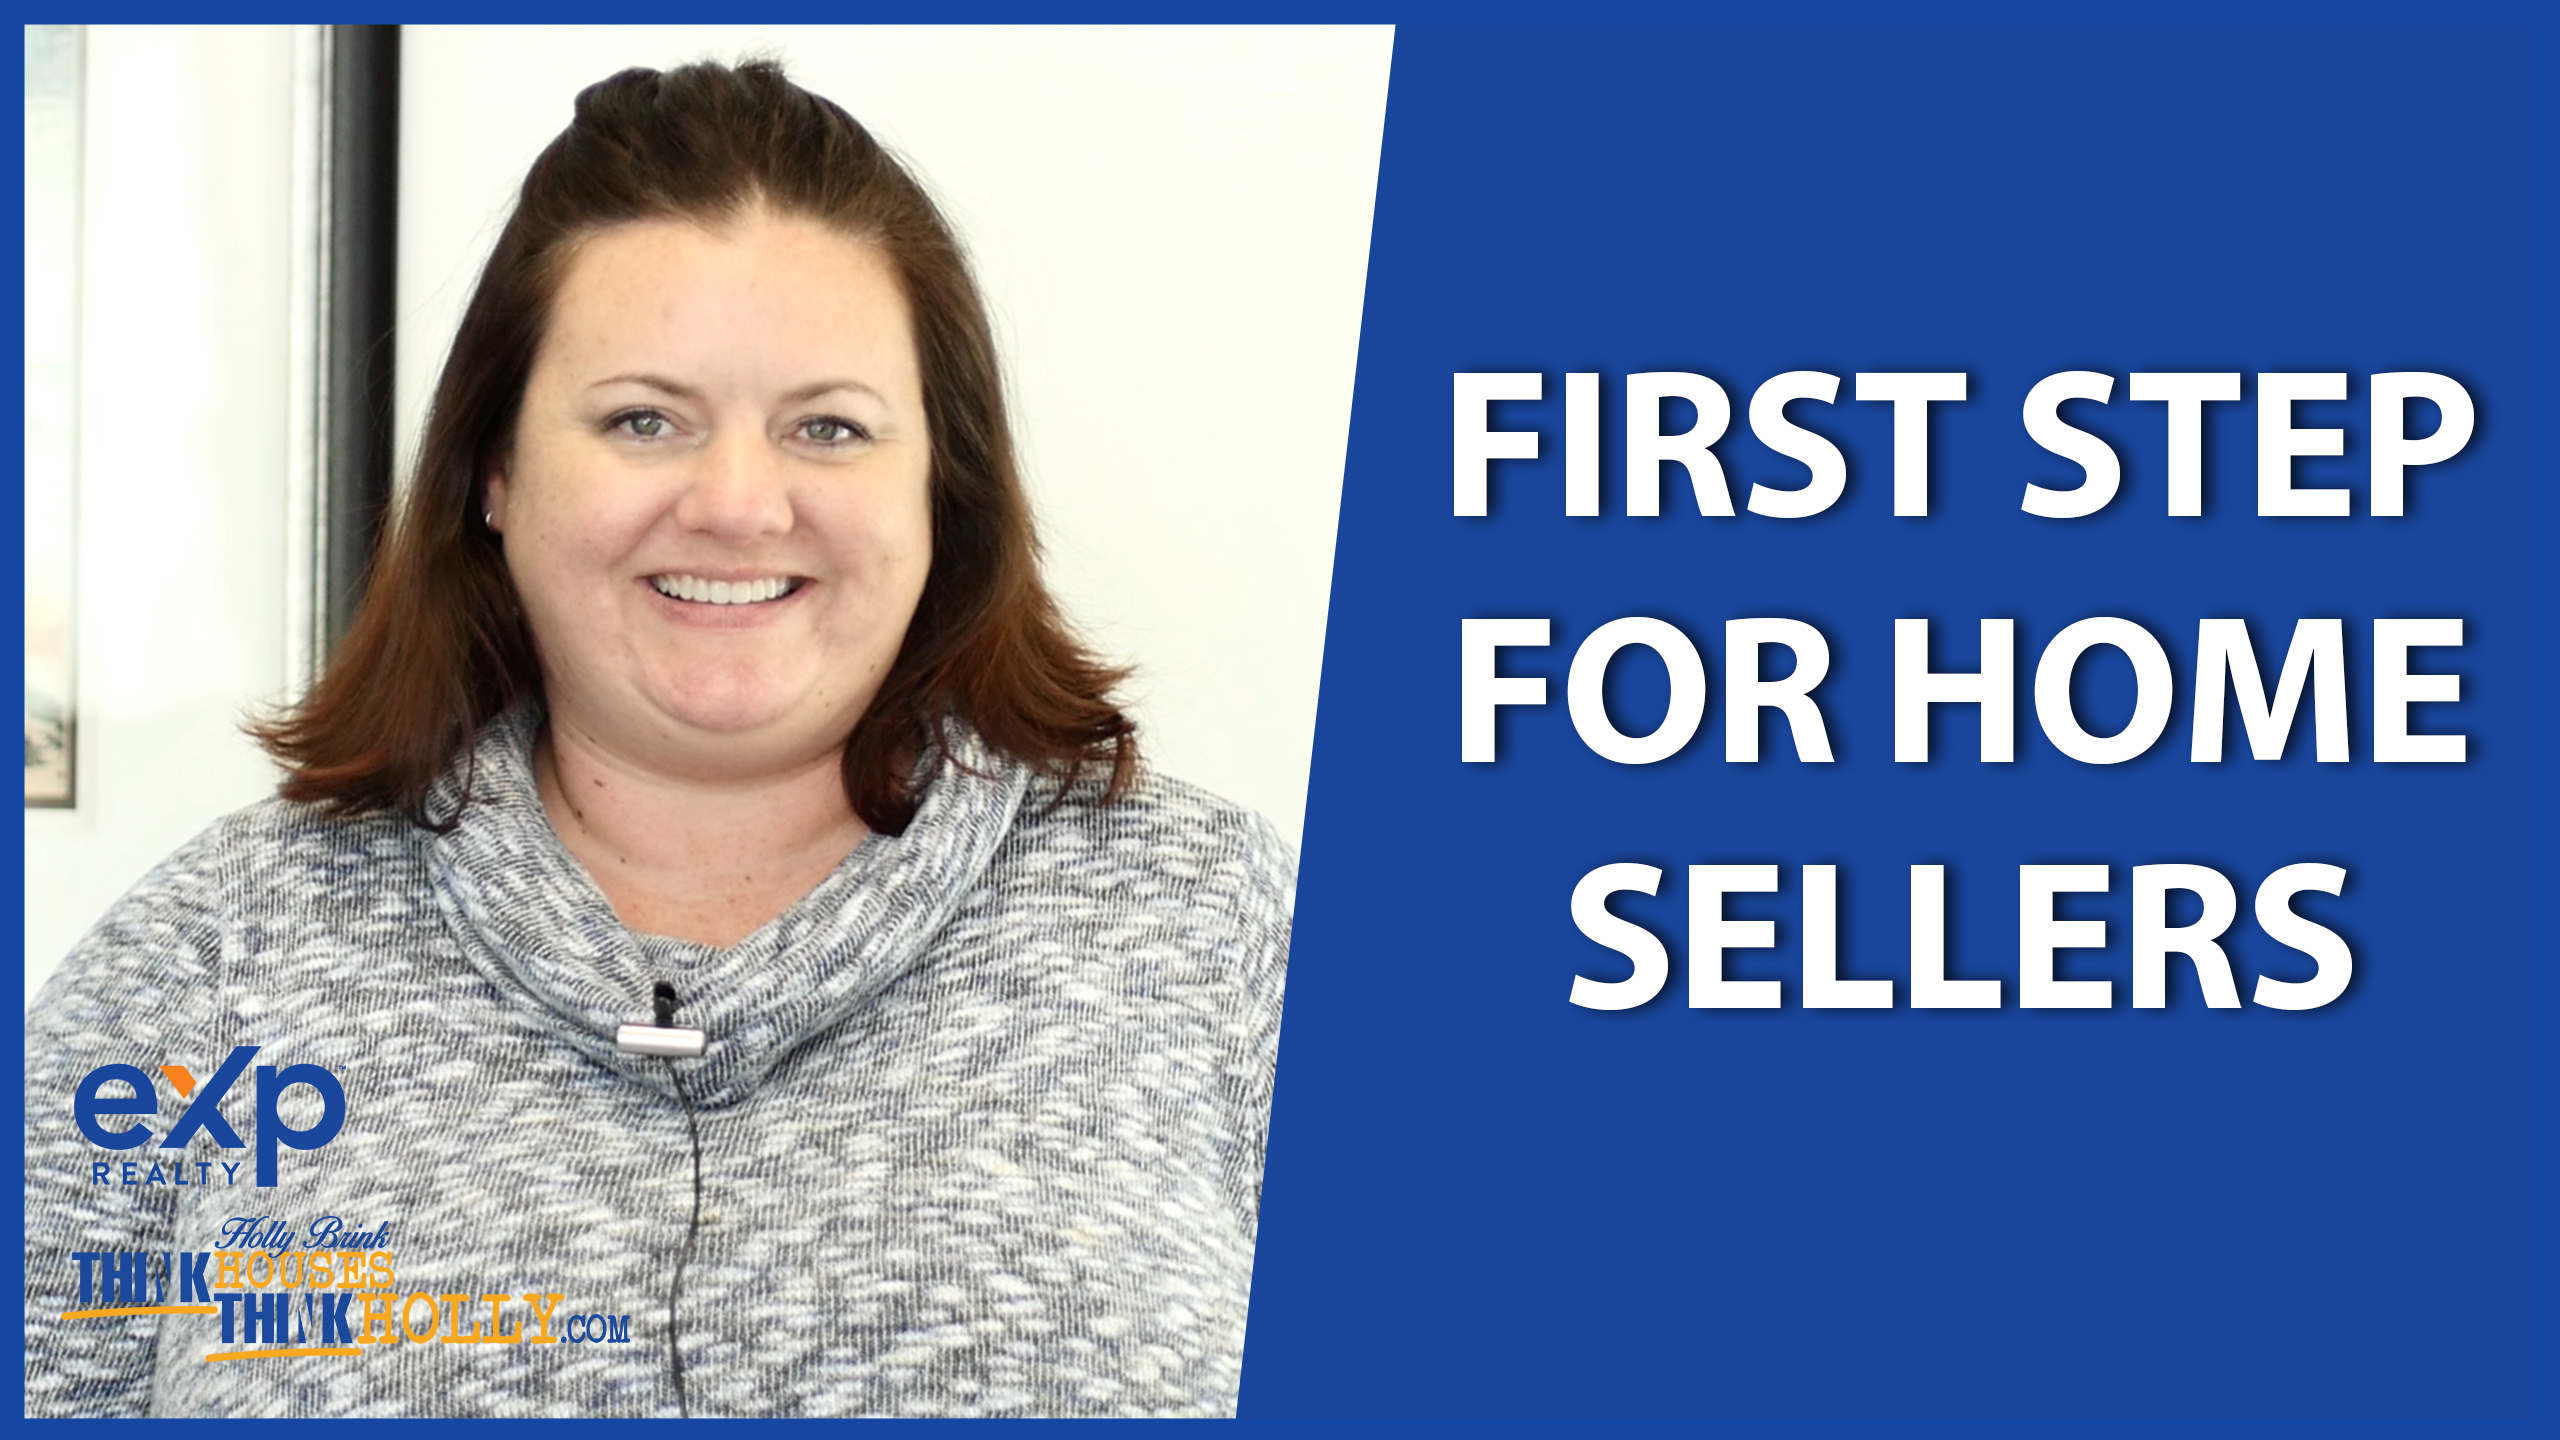 The First Step to Selling a Home